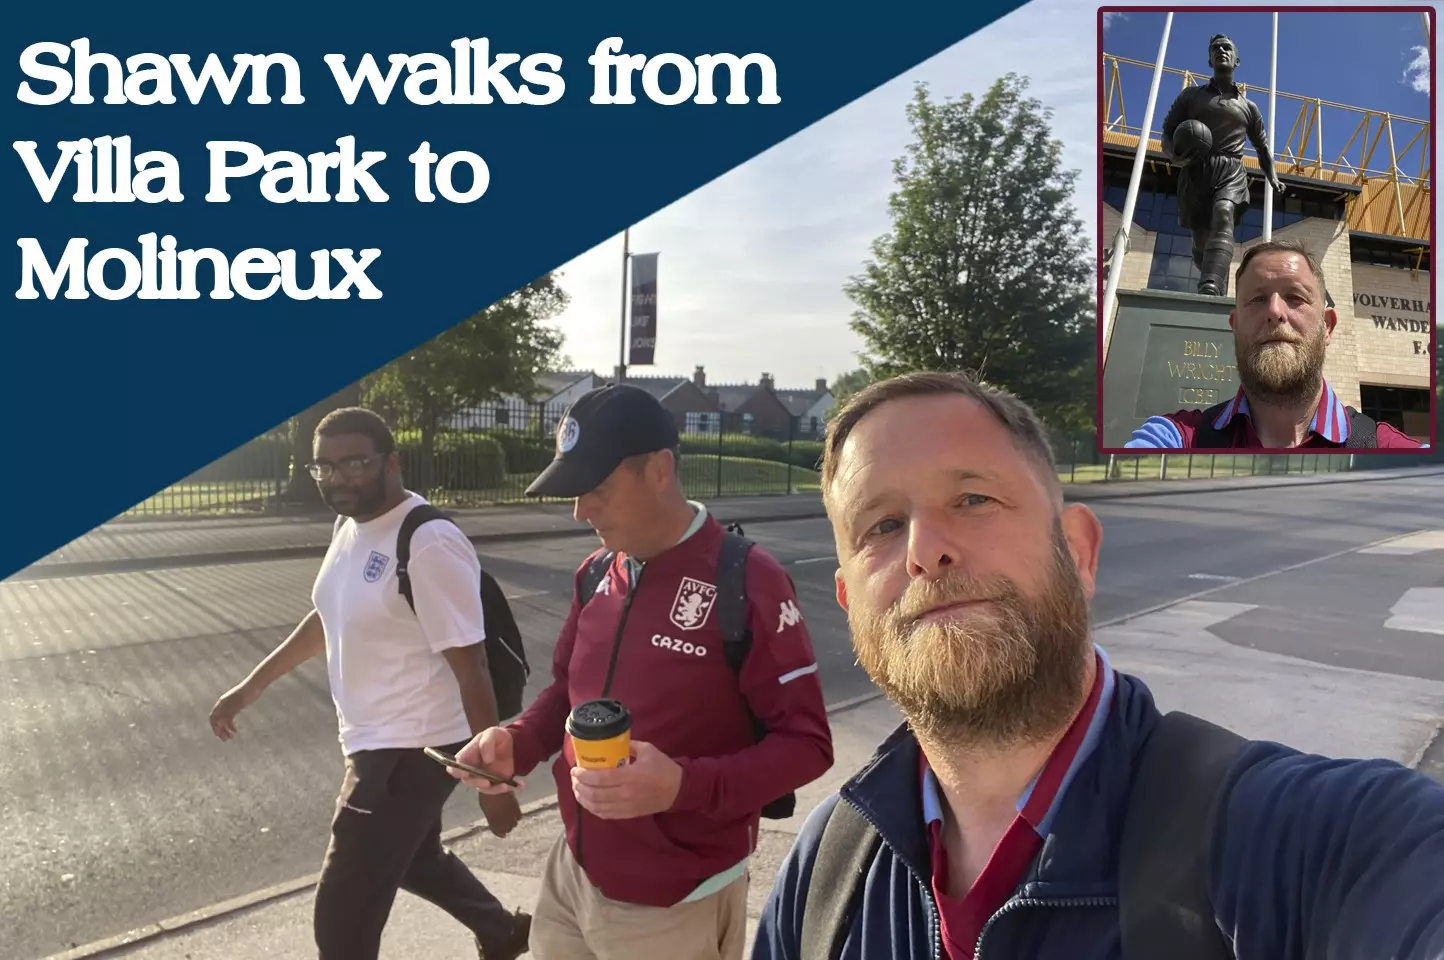 Shawn Chattaway completes walking from Villa Park to Molineux as part of a relay visiting the 92 English Football League grounds